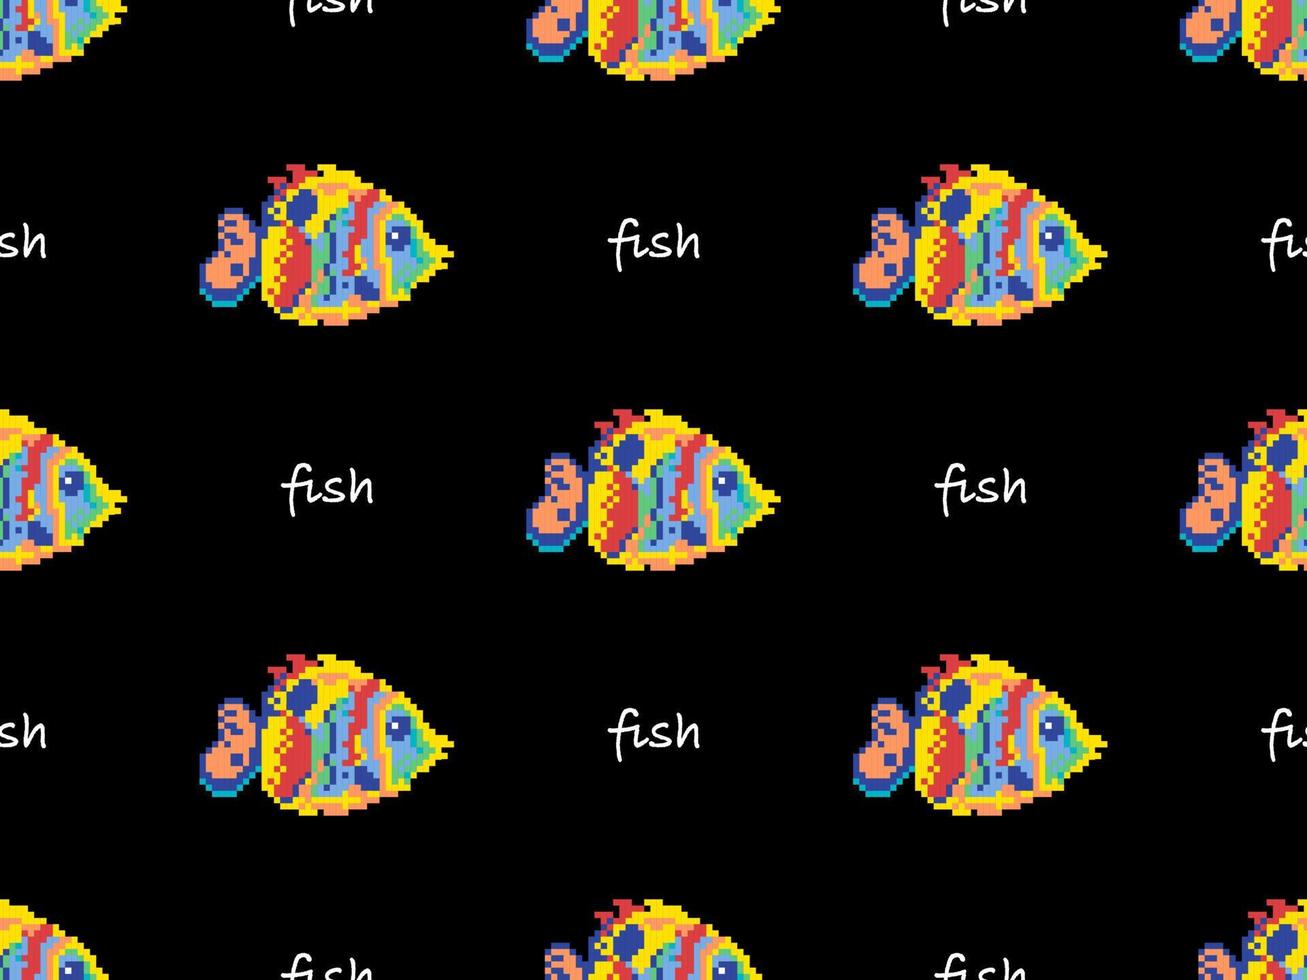 Fish cartoon character seamless pattern on black background. Pixel style vector